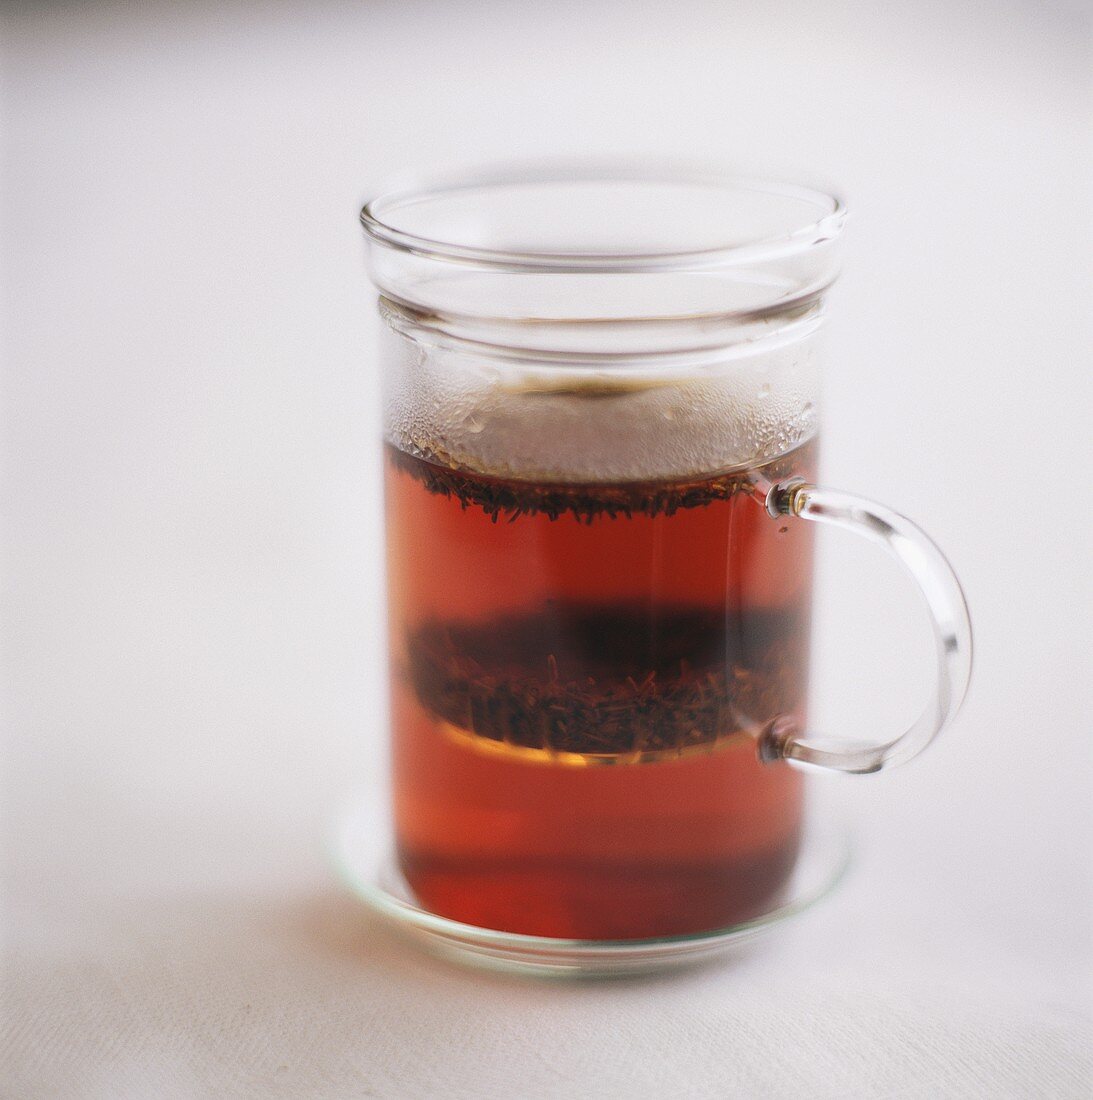 Tea with tea leaves in glass